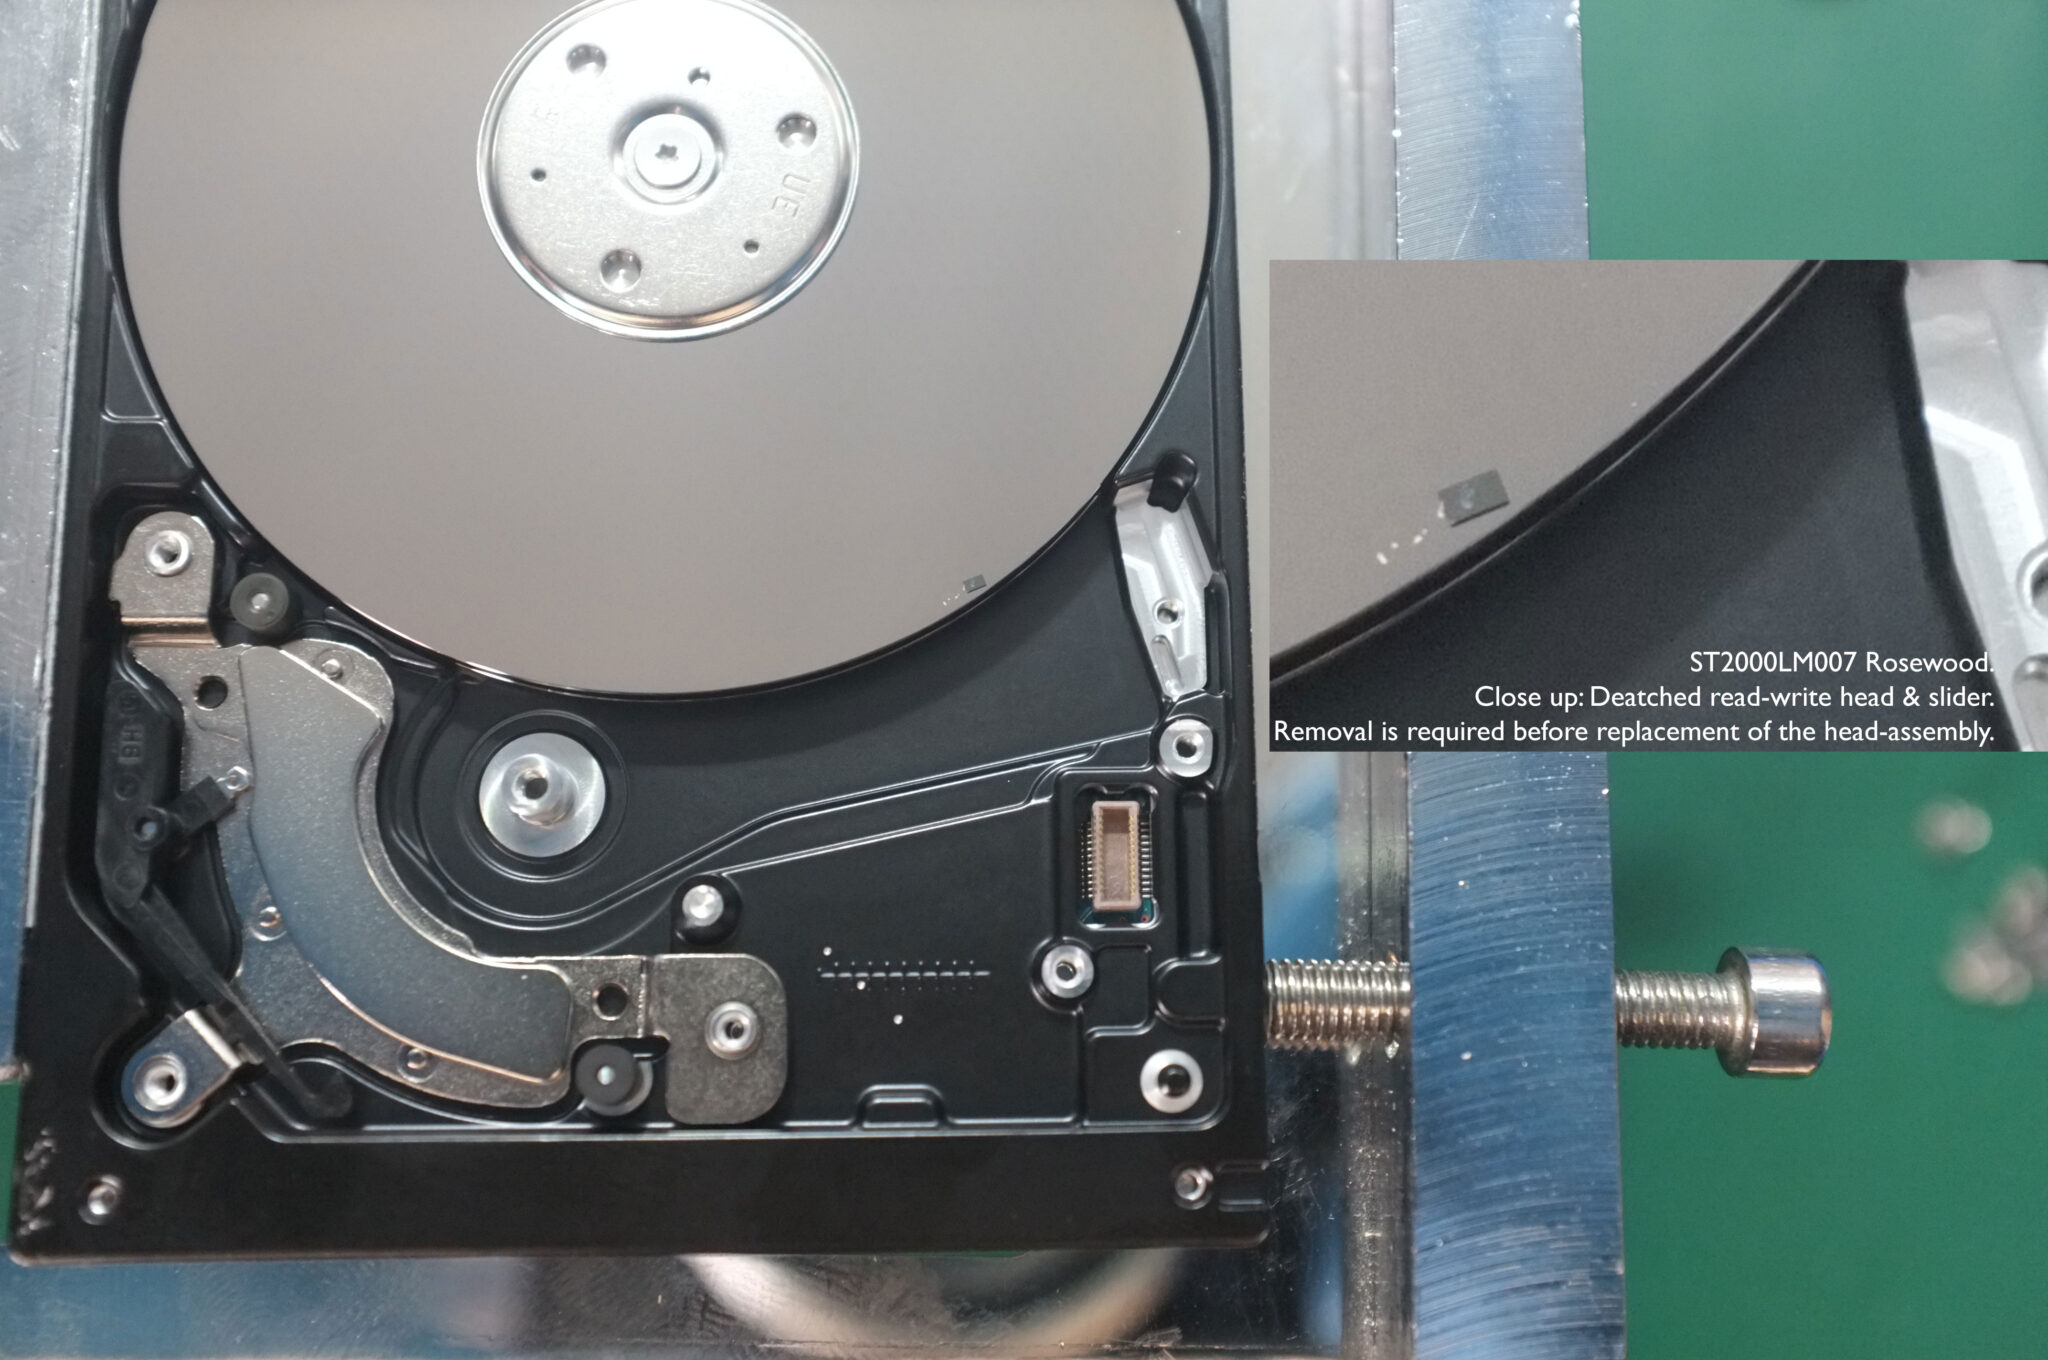 HDD slider & head detached from head assembly